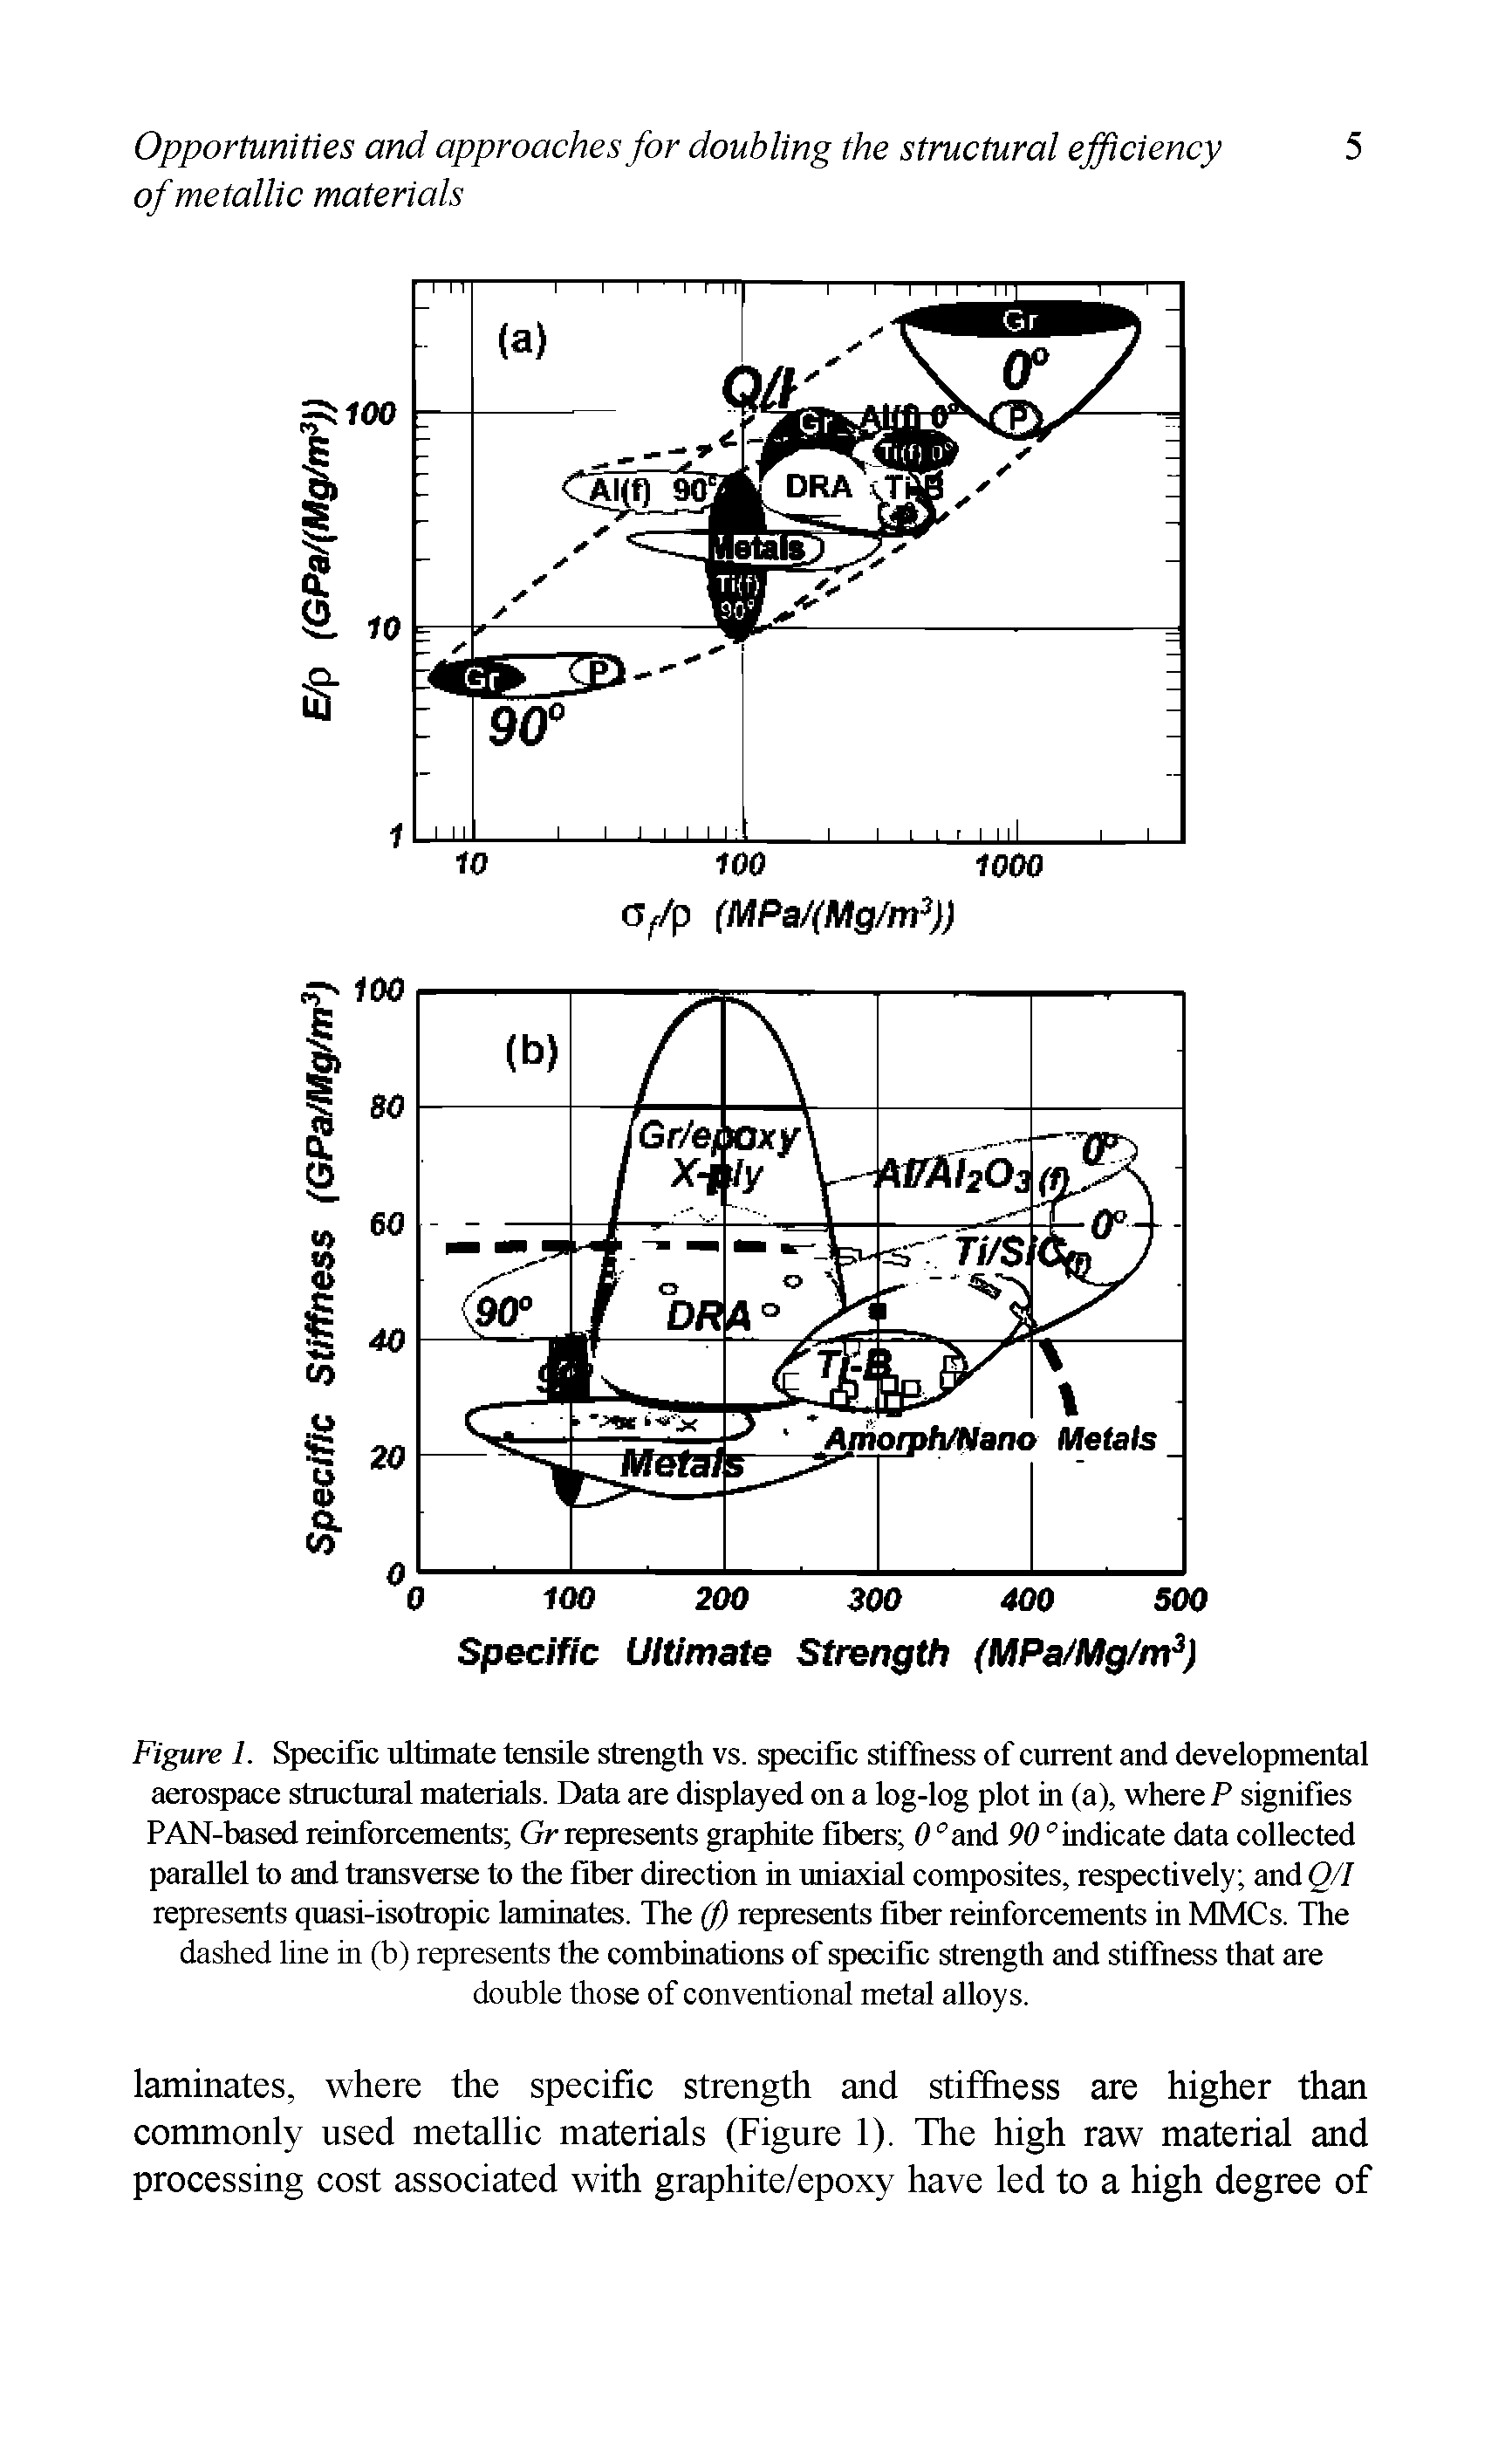 Figure 1. Specific ultimate tensile strength vs. specific stiffness of current and developmental aerospace structural materials. Data are displayed on a log-log plot in (a), where P signifies PAN-based reinforcements Gr represents graphite fibers 0 0 and 90 0 indicate data collected parallel to and transverse to the fiber direction in uniaxial composites, respectively and Q/I represents quasi-isotropic laminates. The (f represents fiber reinforcements in MMCs. The dashed line in (b) represents the combinations of specific strength and stiffness that are double those of conventional metal alloys.